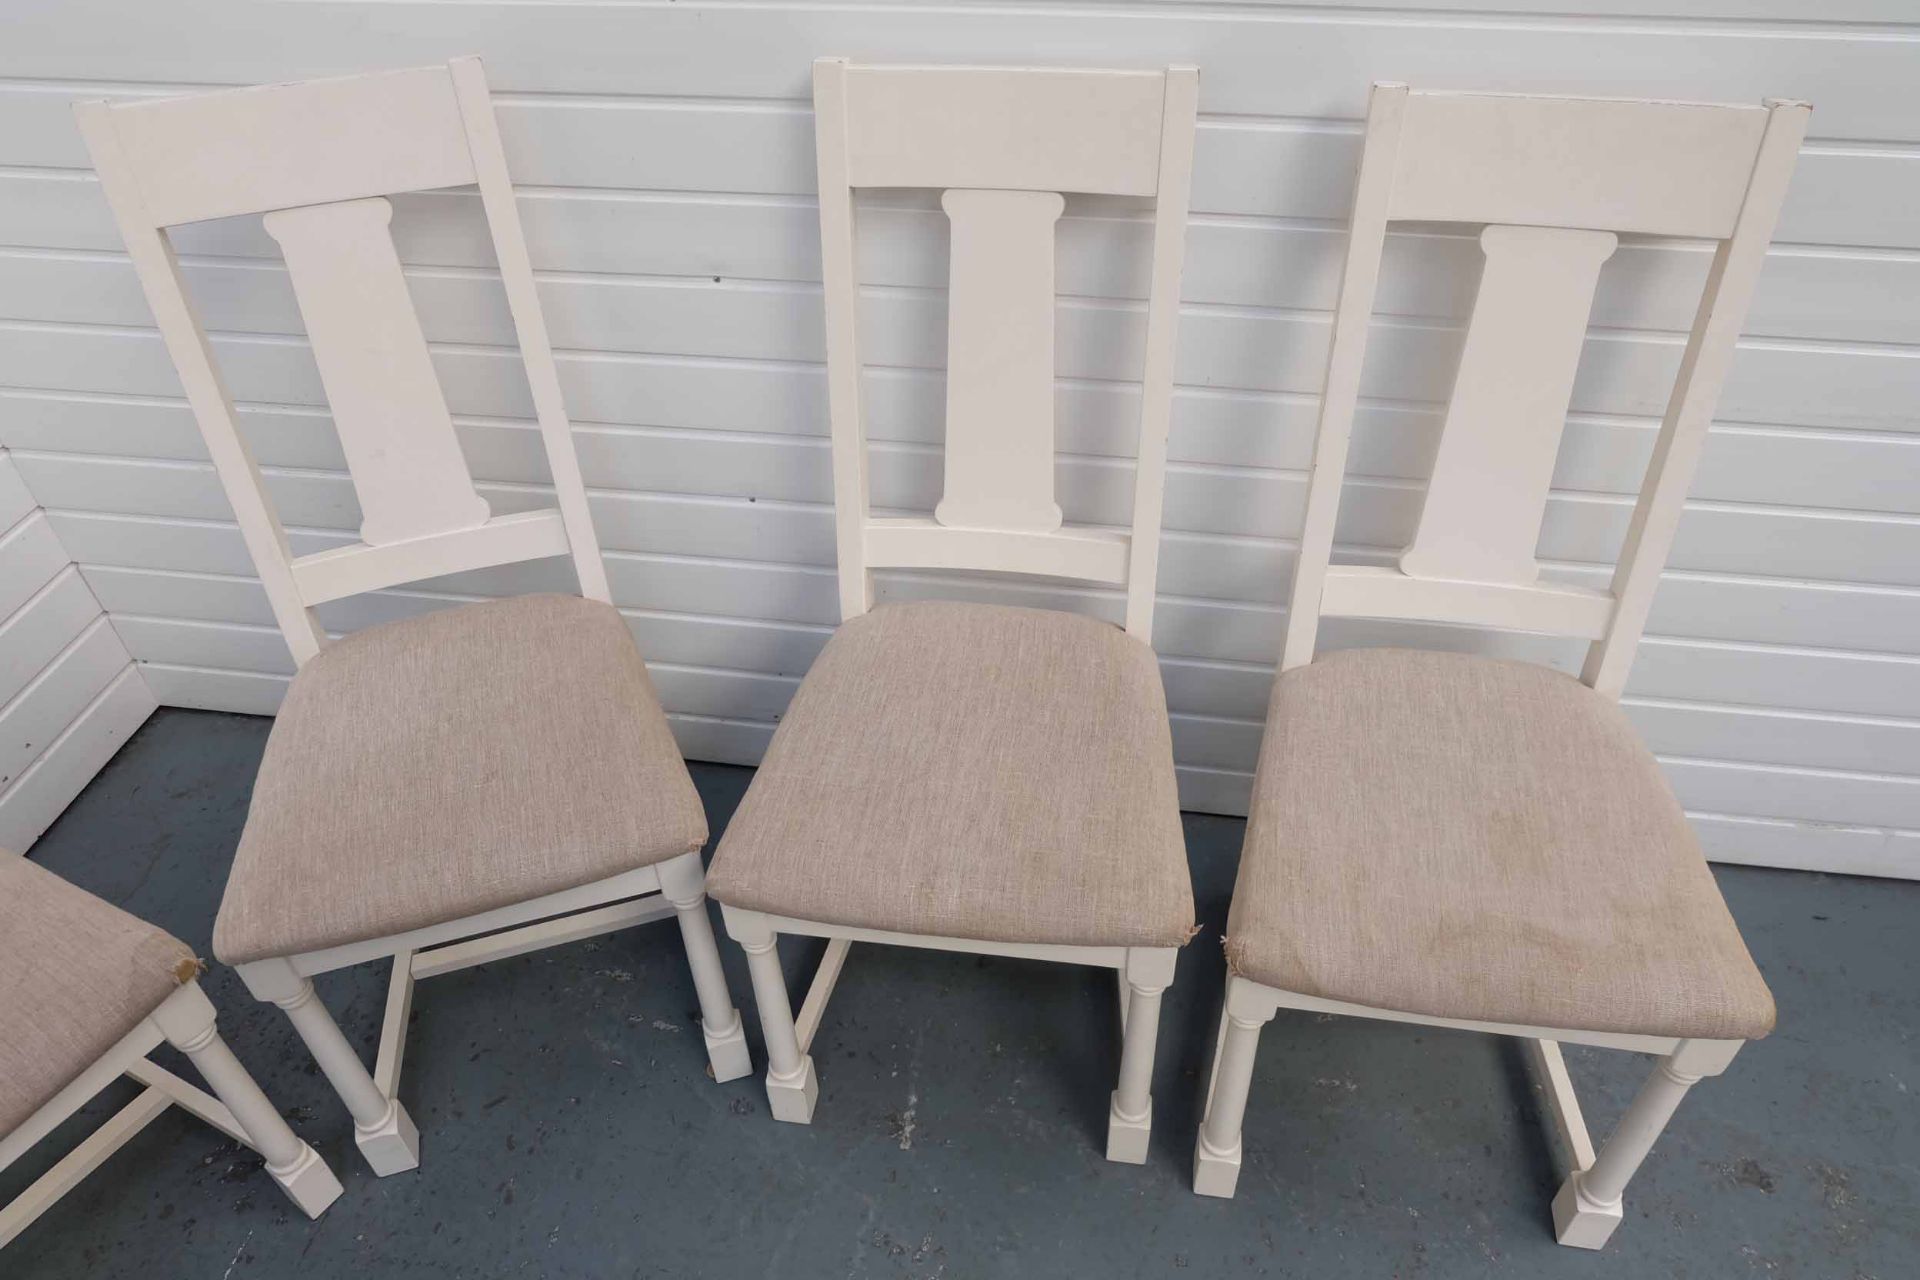 Set of 5 White Wooden Dining Chairs With Upholstered Seats. - Image 3 of 8